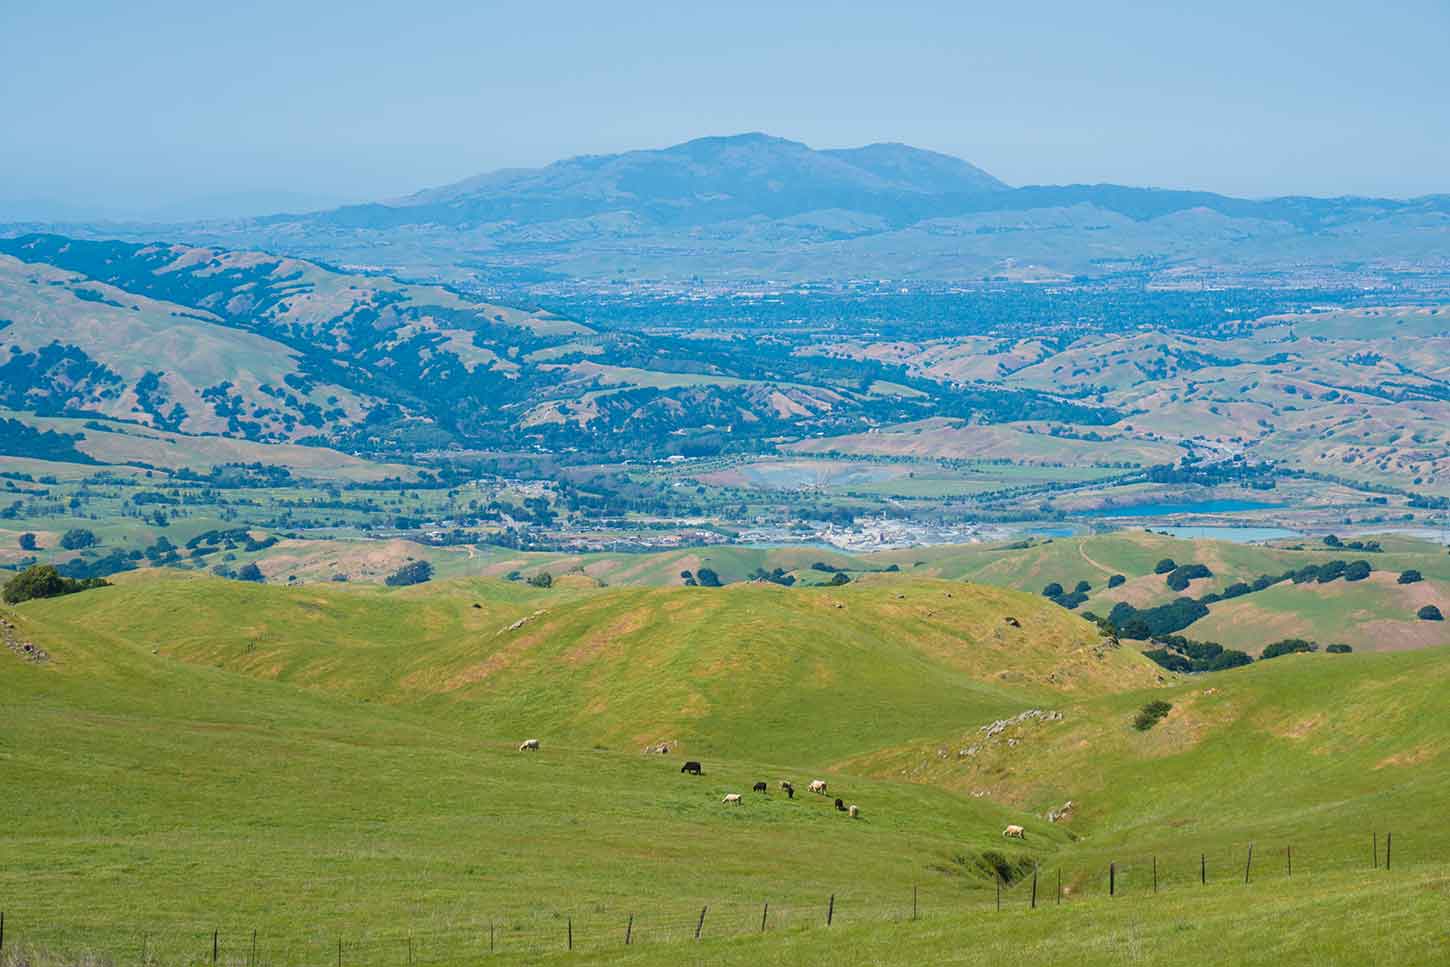 View of Mount Diablo from the Eagle Trail, Mission Peak Regional Preserve